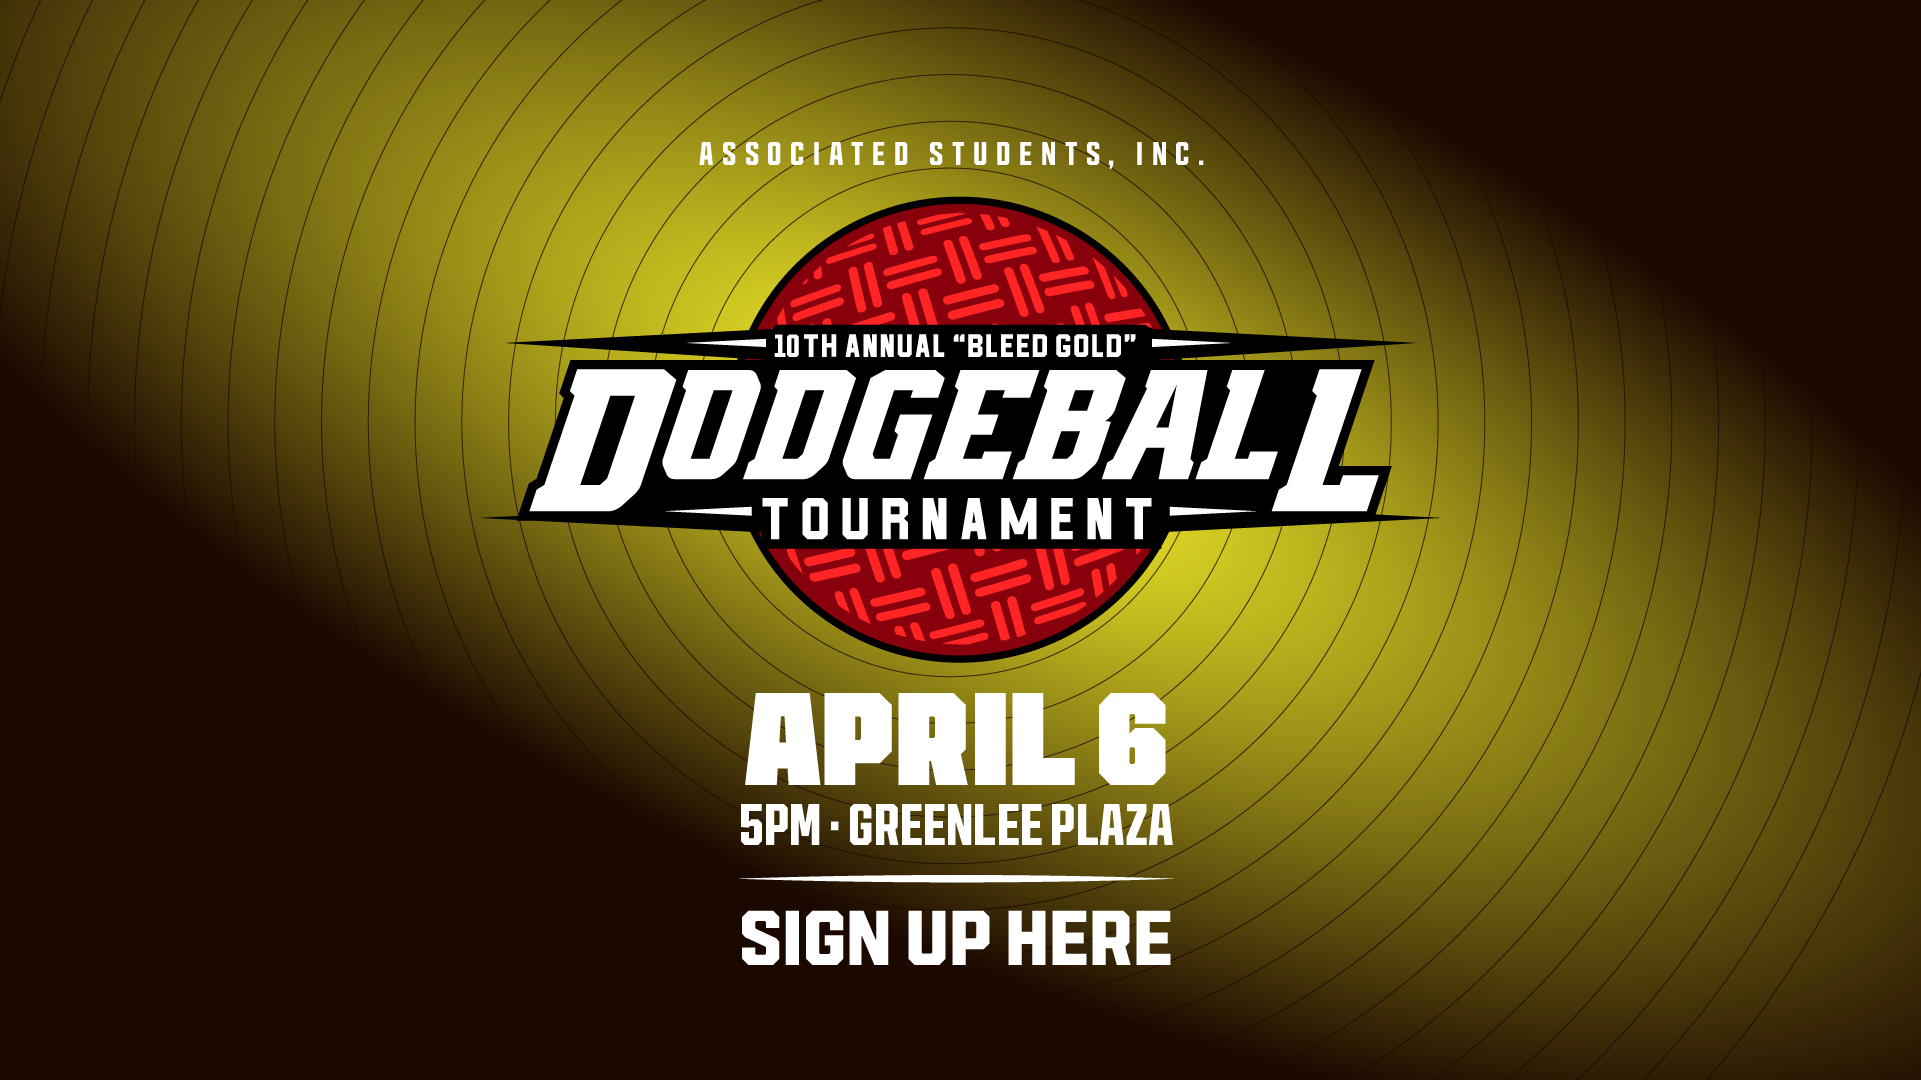 10th Annual "Bleed Gold" Dodgeball Tournament